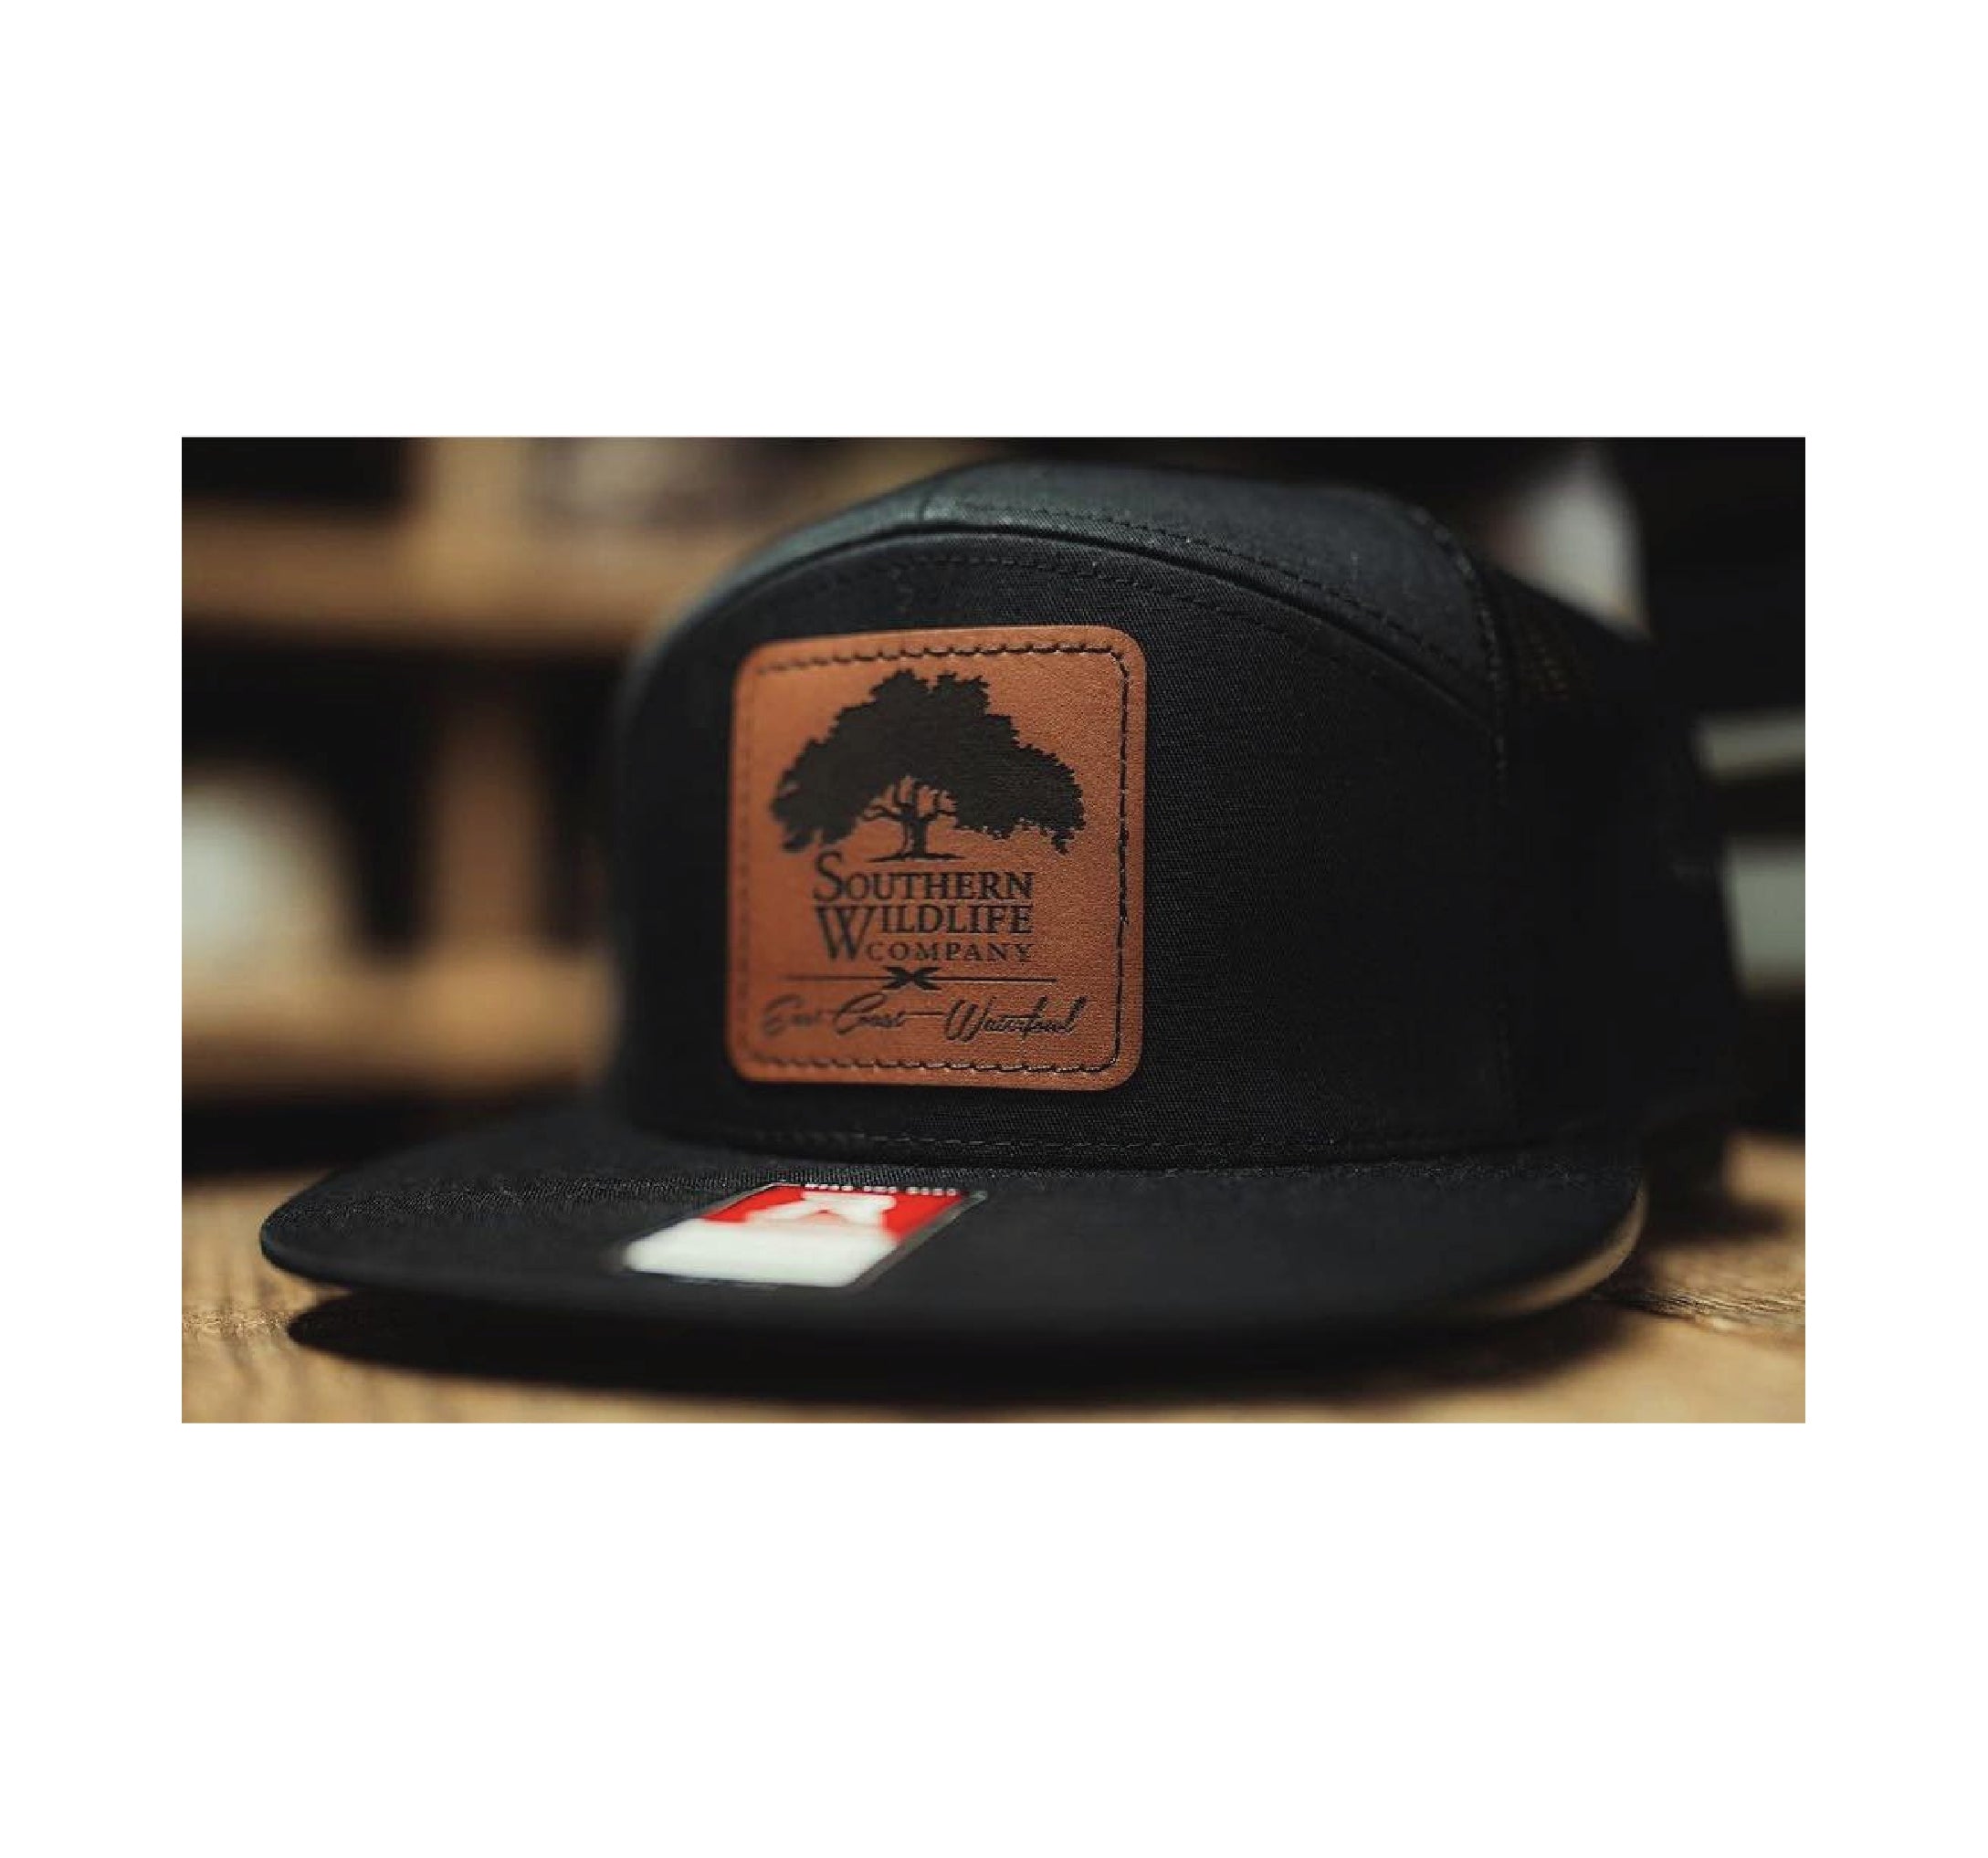 Southern Wildlife Hats – Southern Wildlife Co